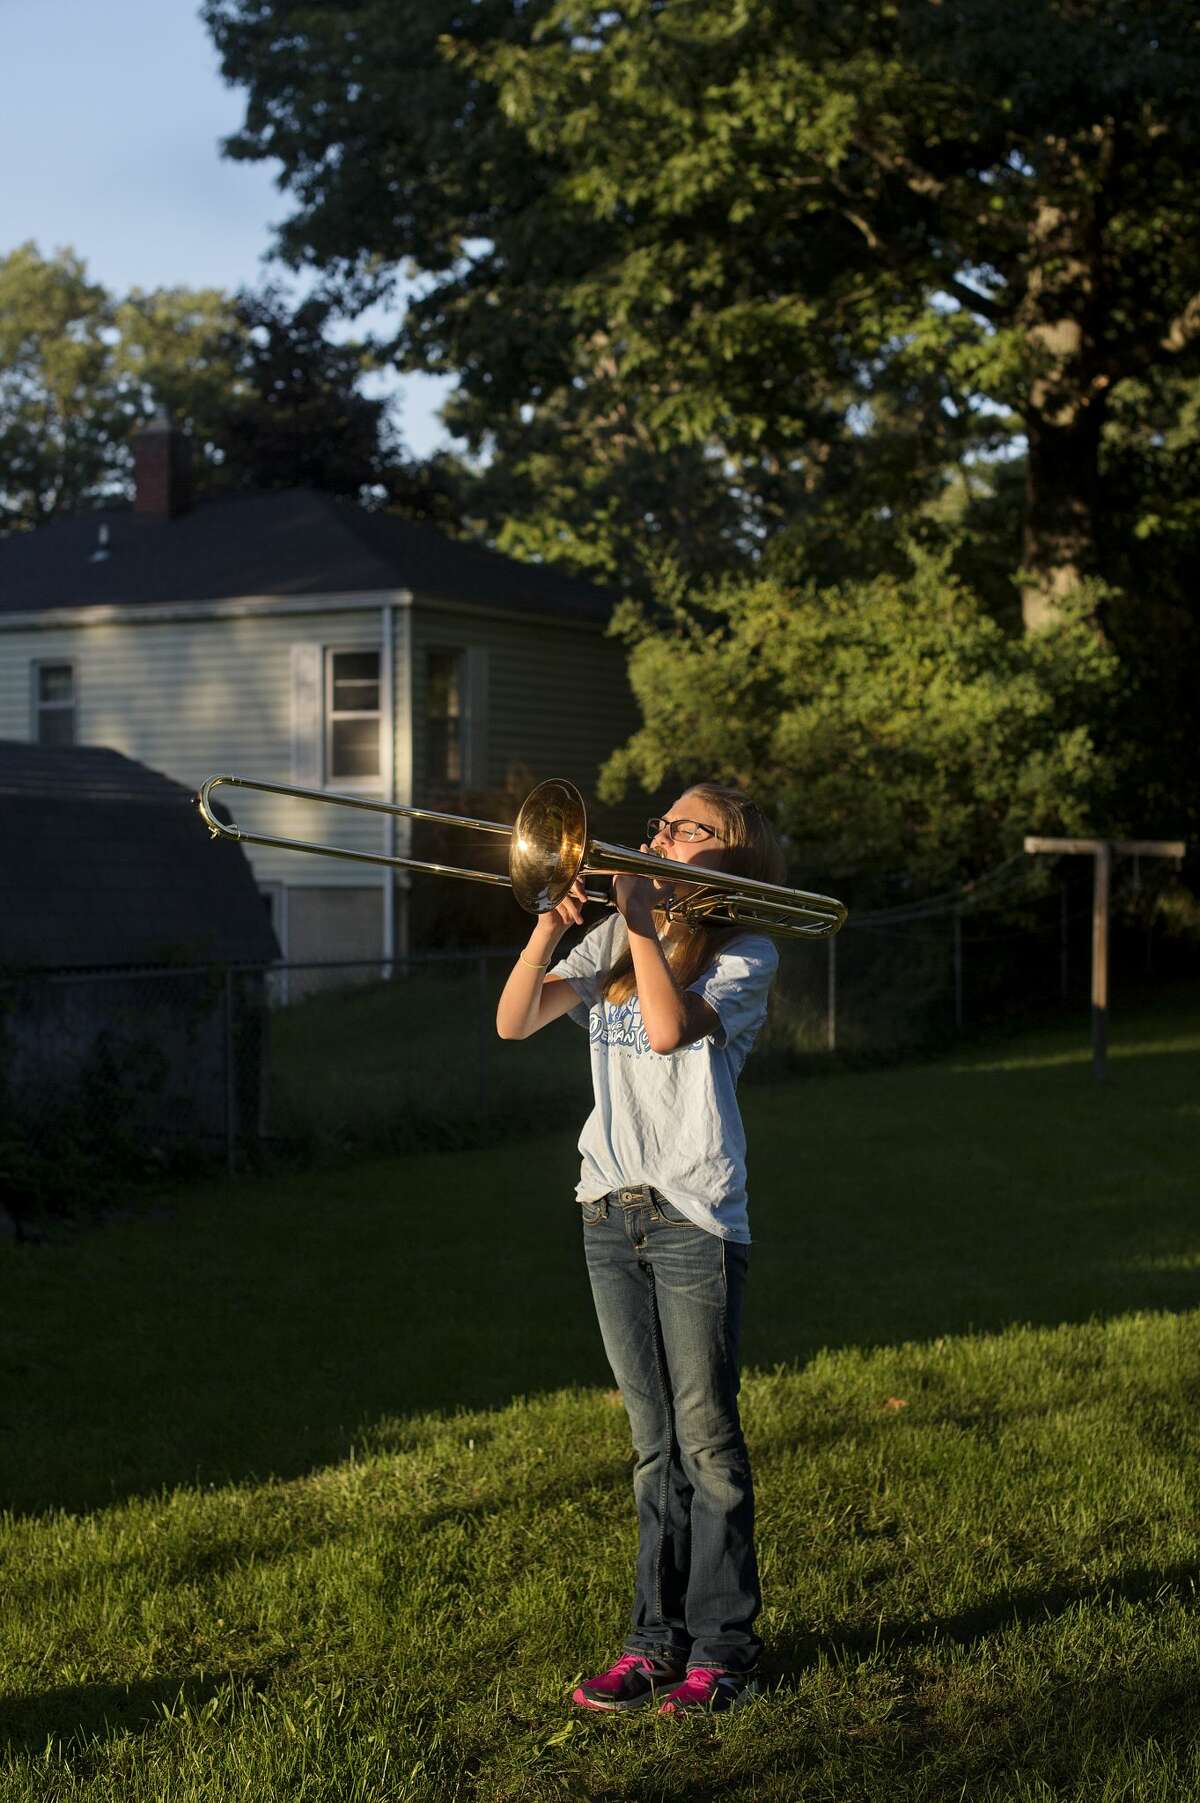 BRITTNEY LOHMILLER | blohmiller@mdn.net Meridian High School freshman Cassidy Forbes practices her trombone in her backyard September 2, 2016 in Sanford. "The band program is what made me want to stay at Meridian," Cassidy said. "We're no know for our sports but our band is good."